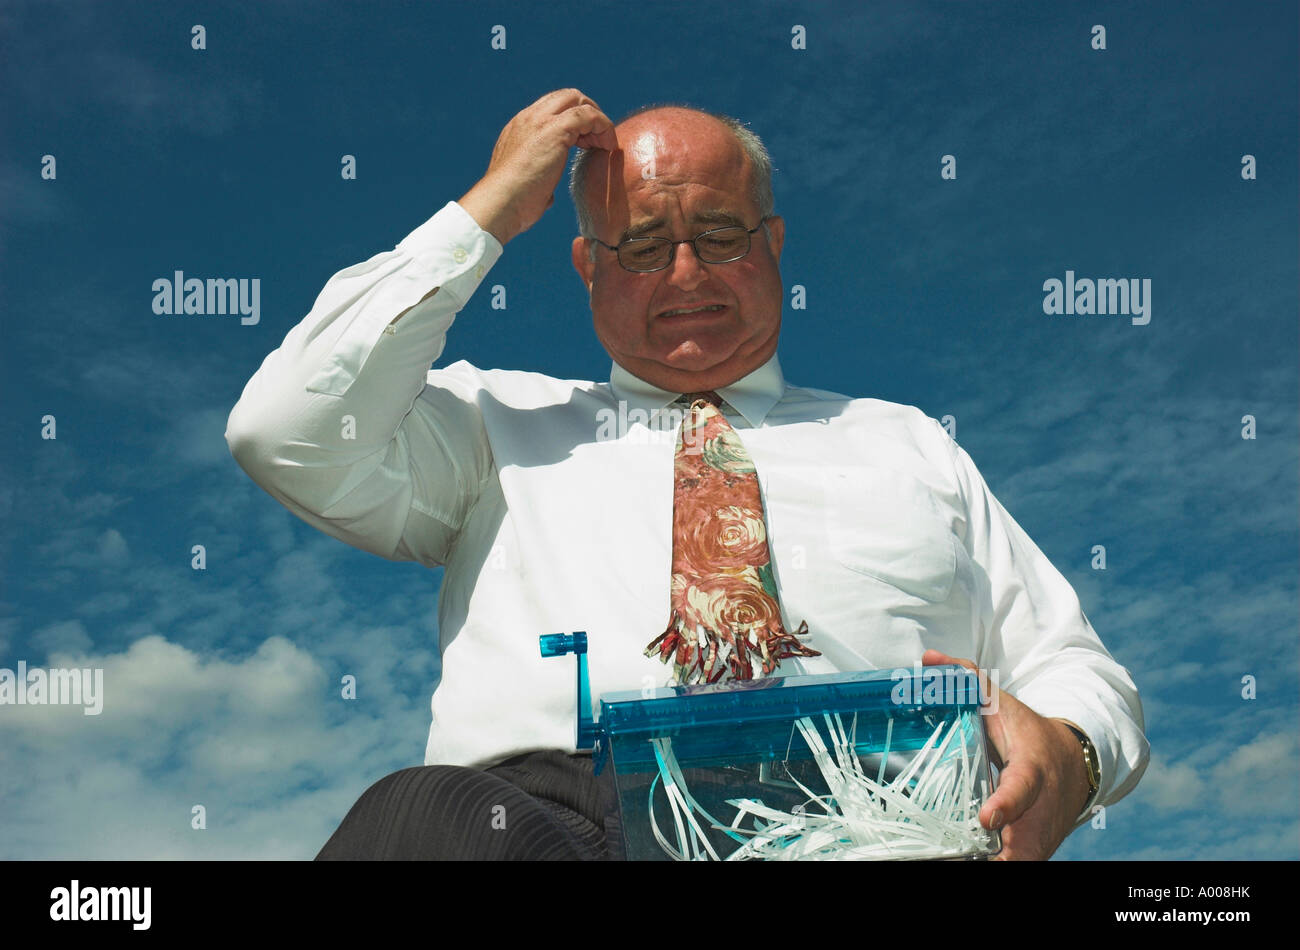 Mature businessman has an accident with the paper shredder! Stock Photo